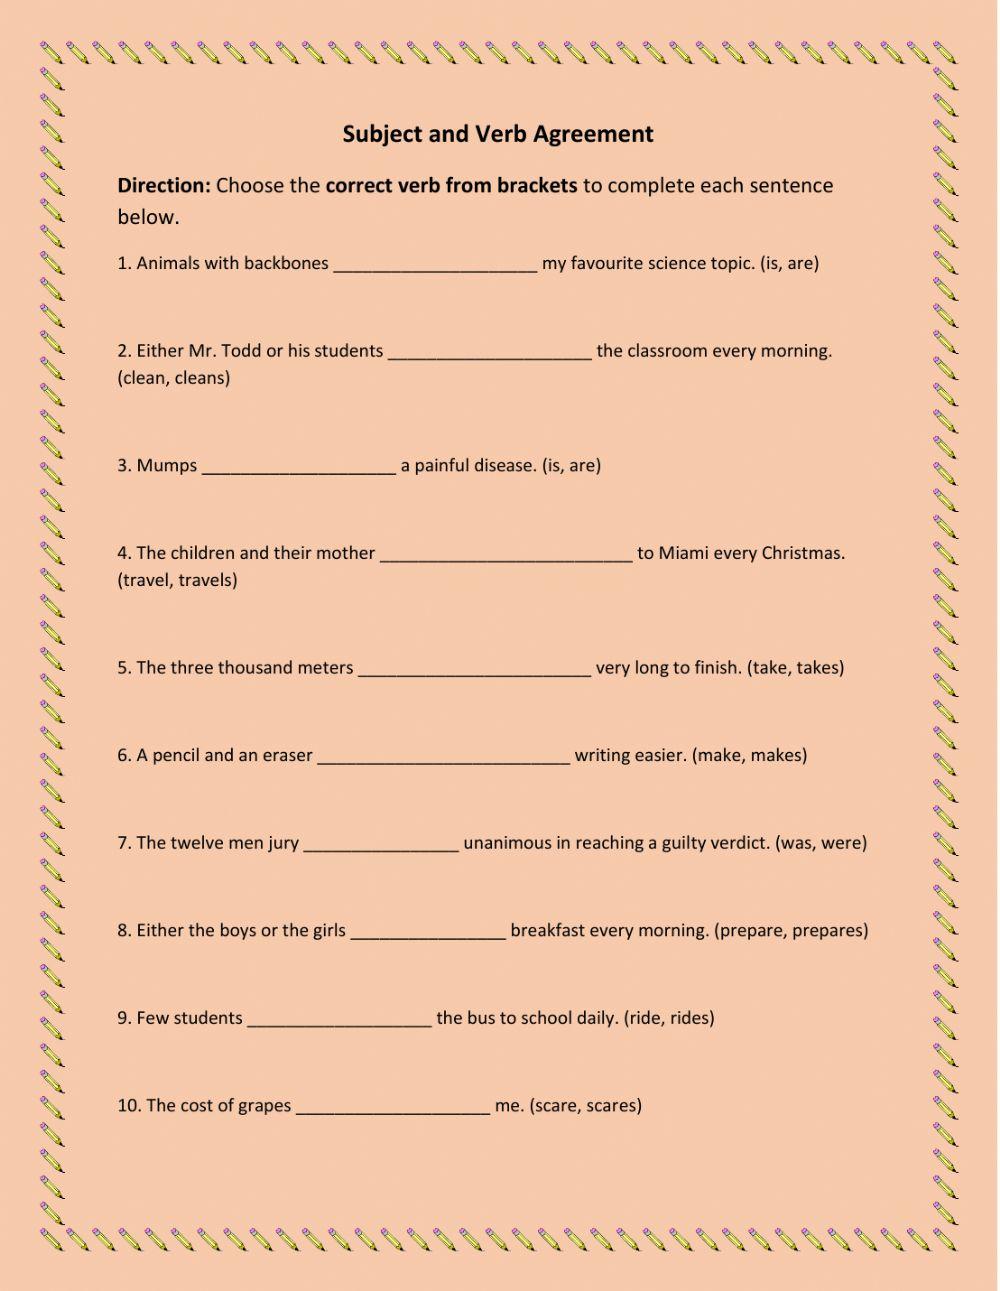 Subject and Verb Agreement 3